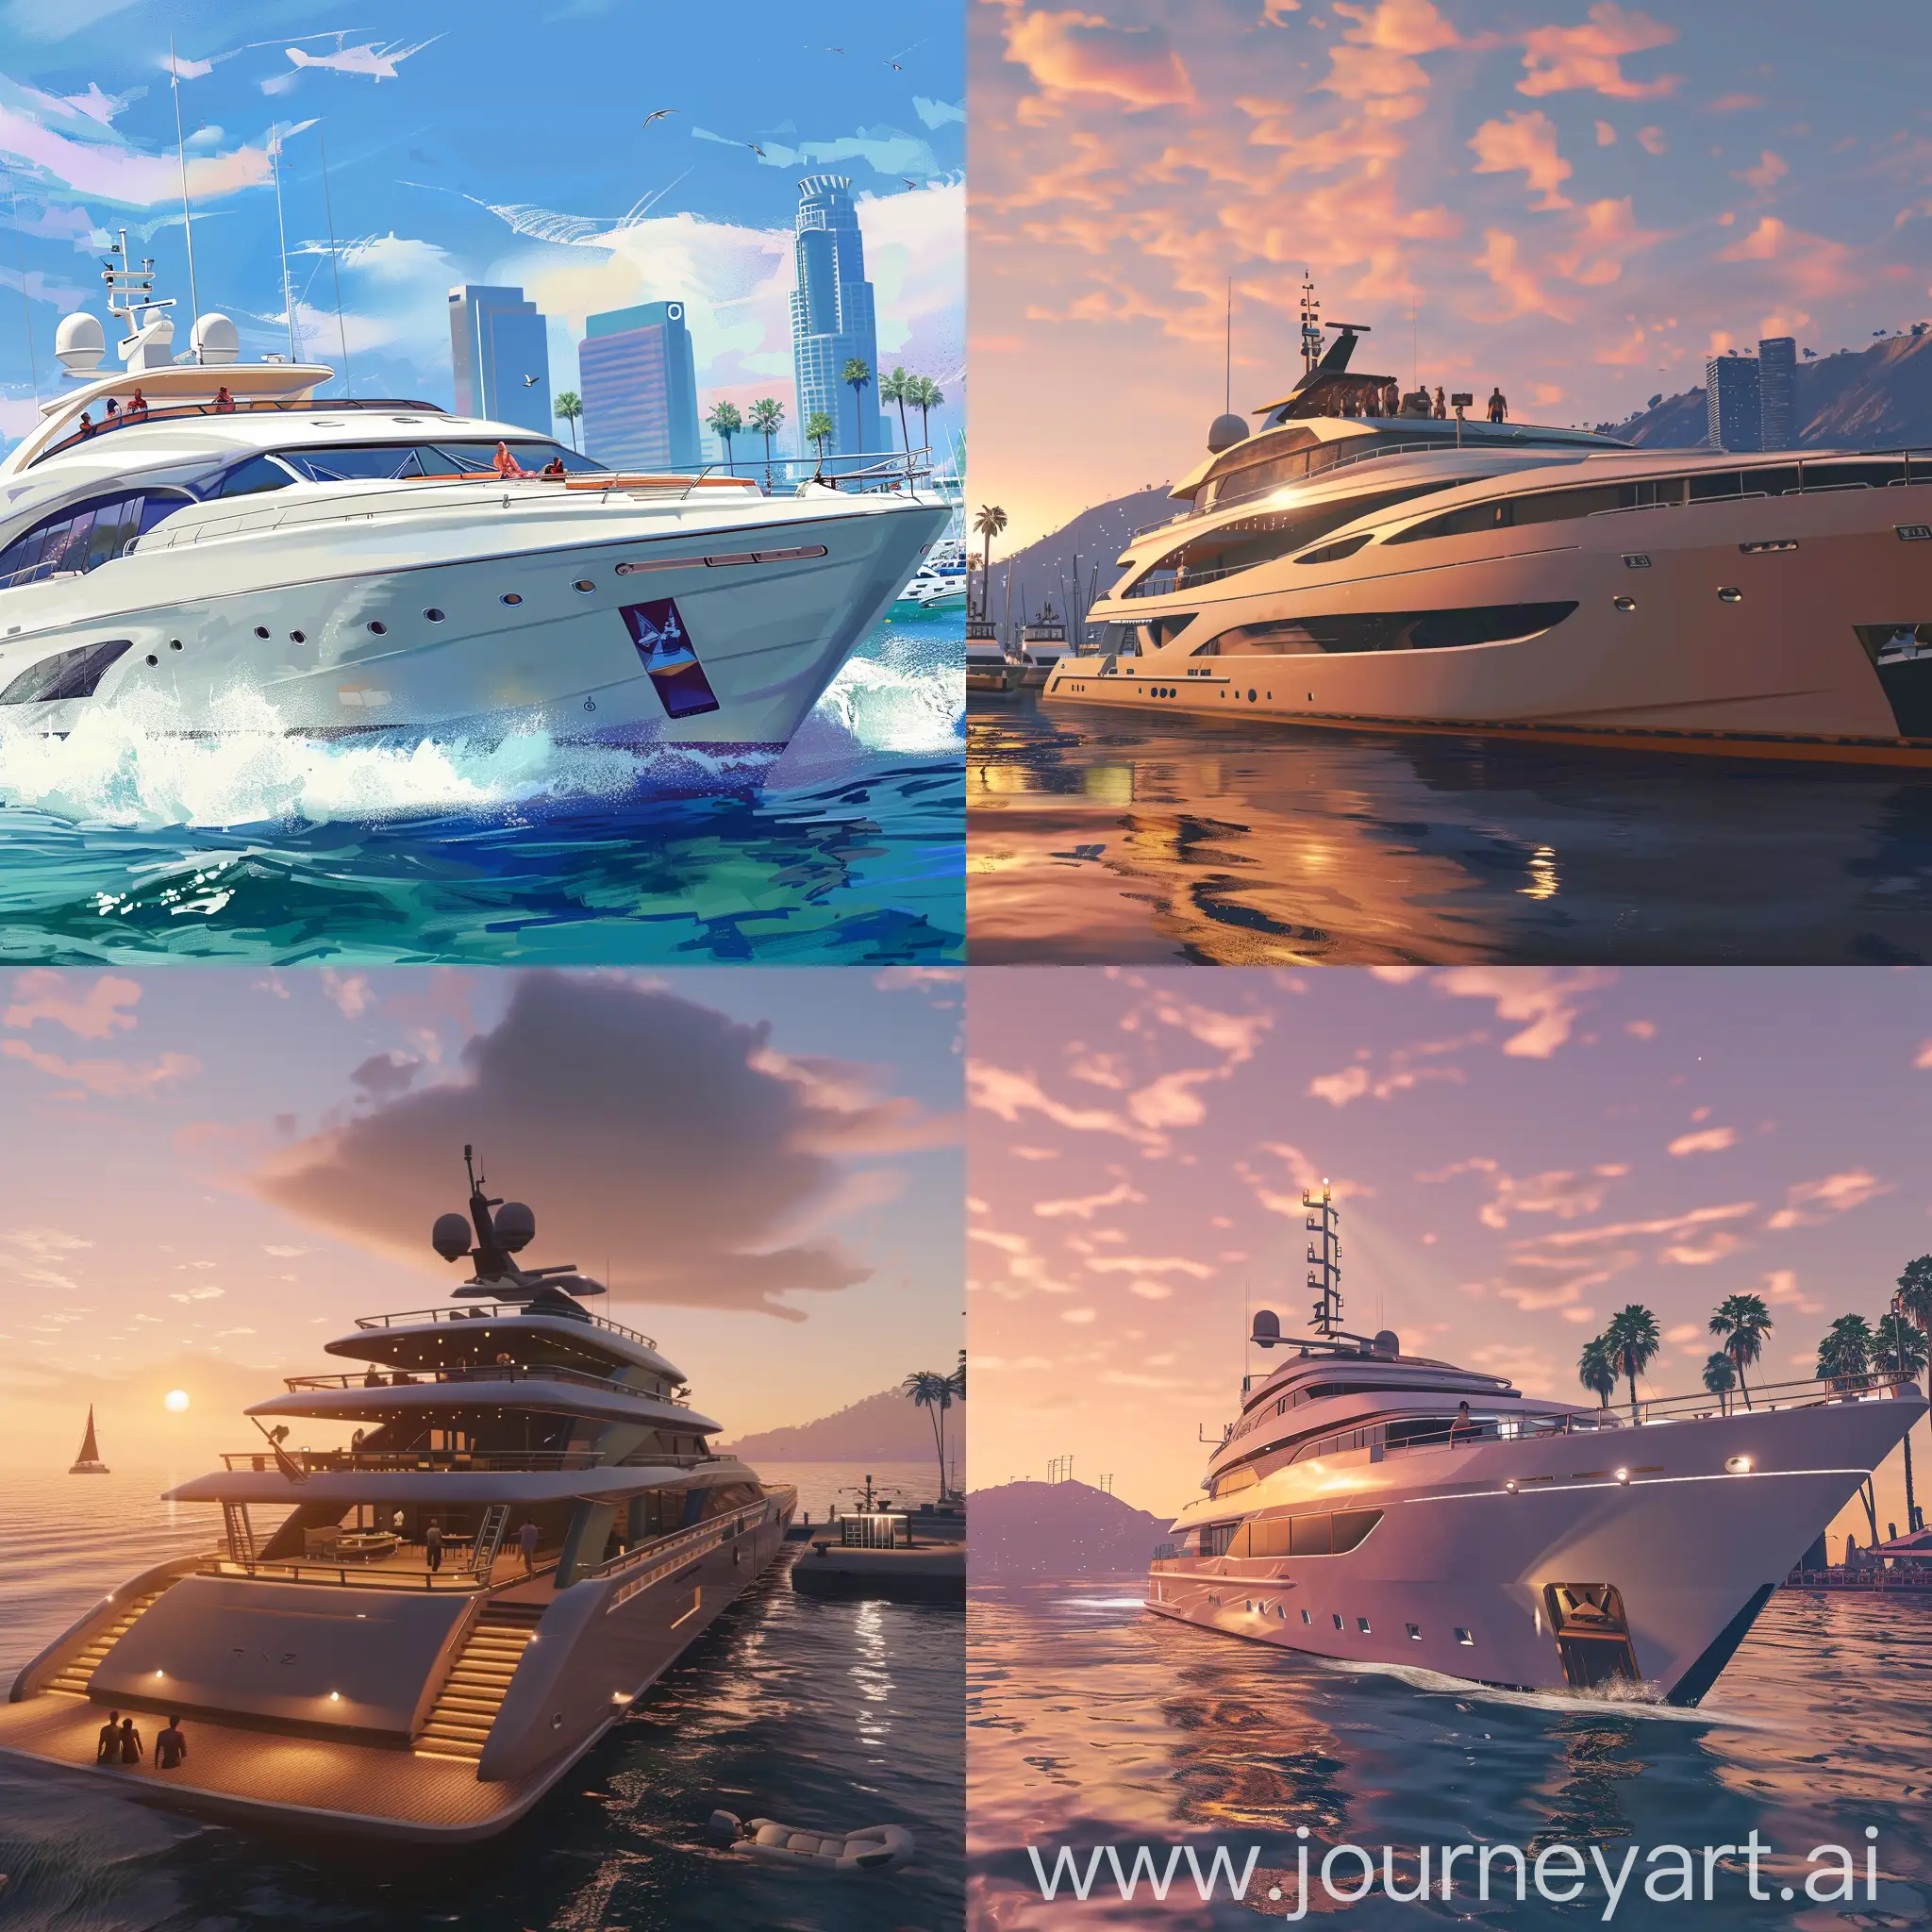 superyacht from the game GTA Five side view on the yacht you can see people vacationing background. Text in yacht - TheDiaz